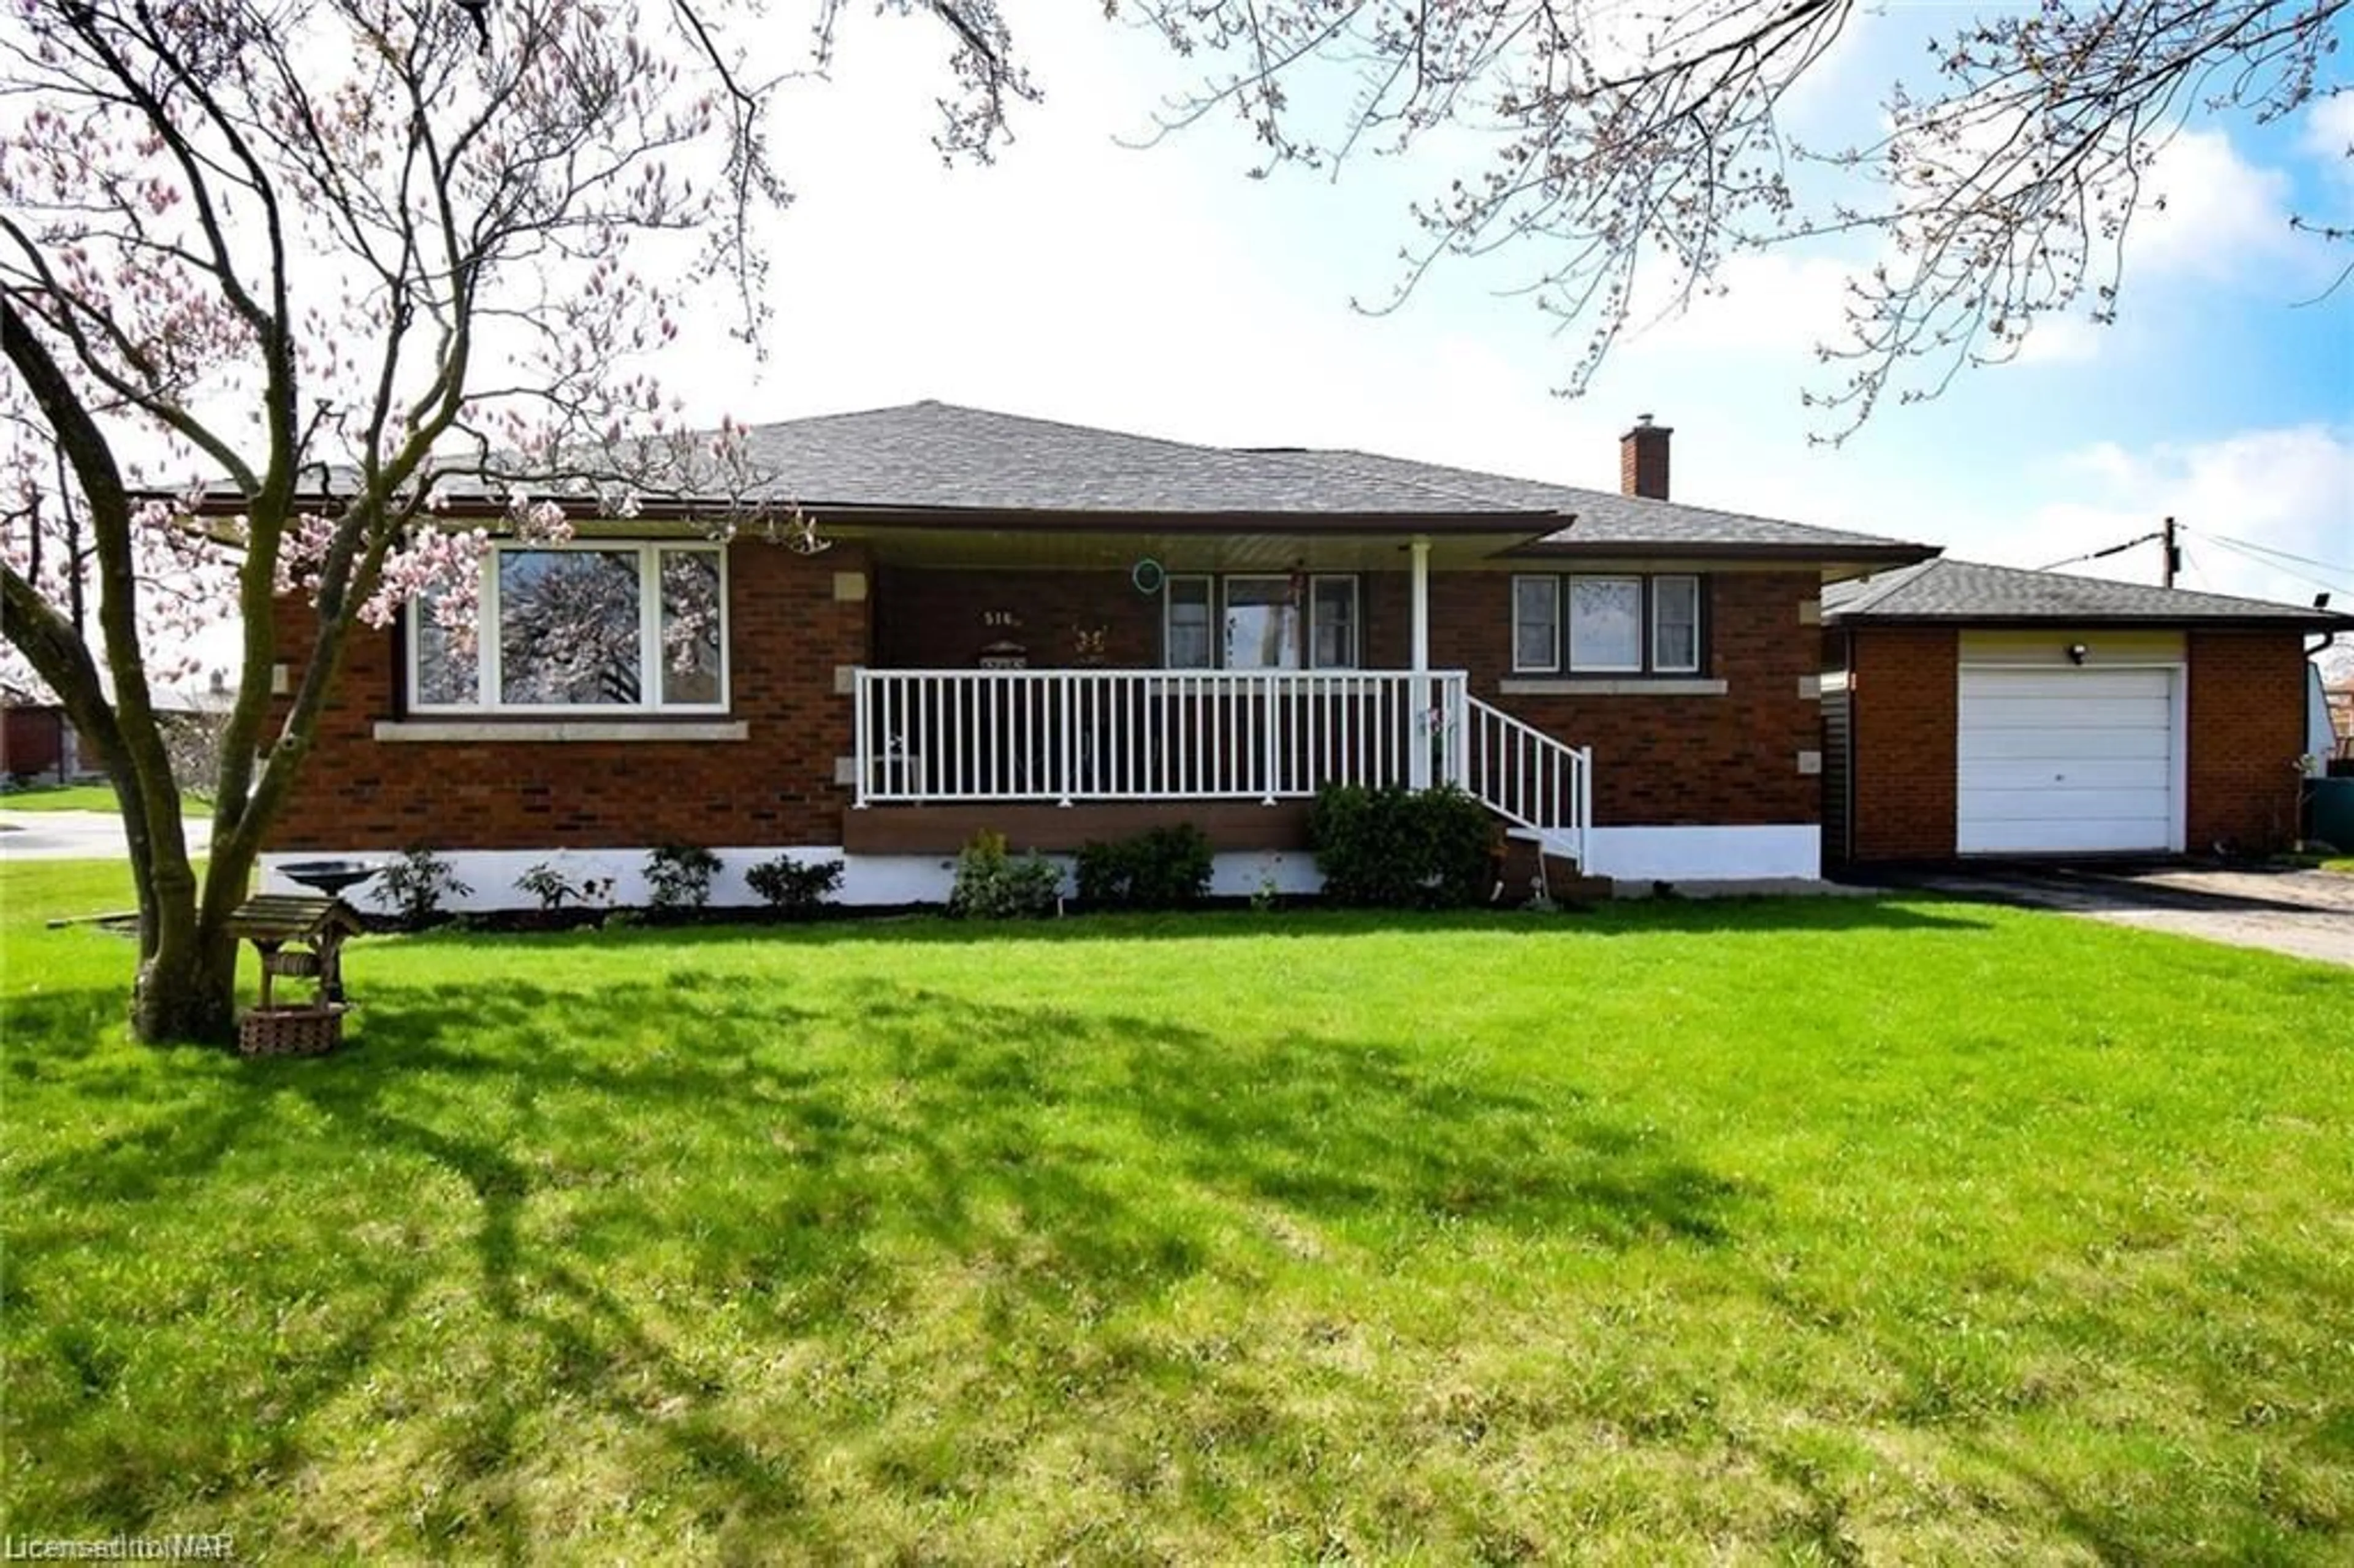 Home with brick exterior material for 516 Sutherland Ave, Welland Ontario L3B 5A2